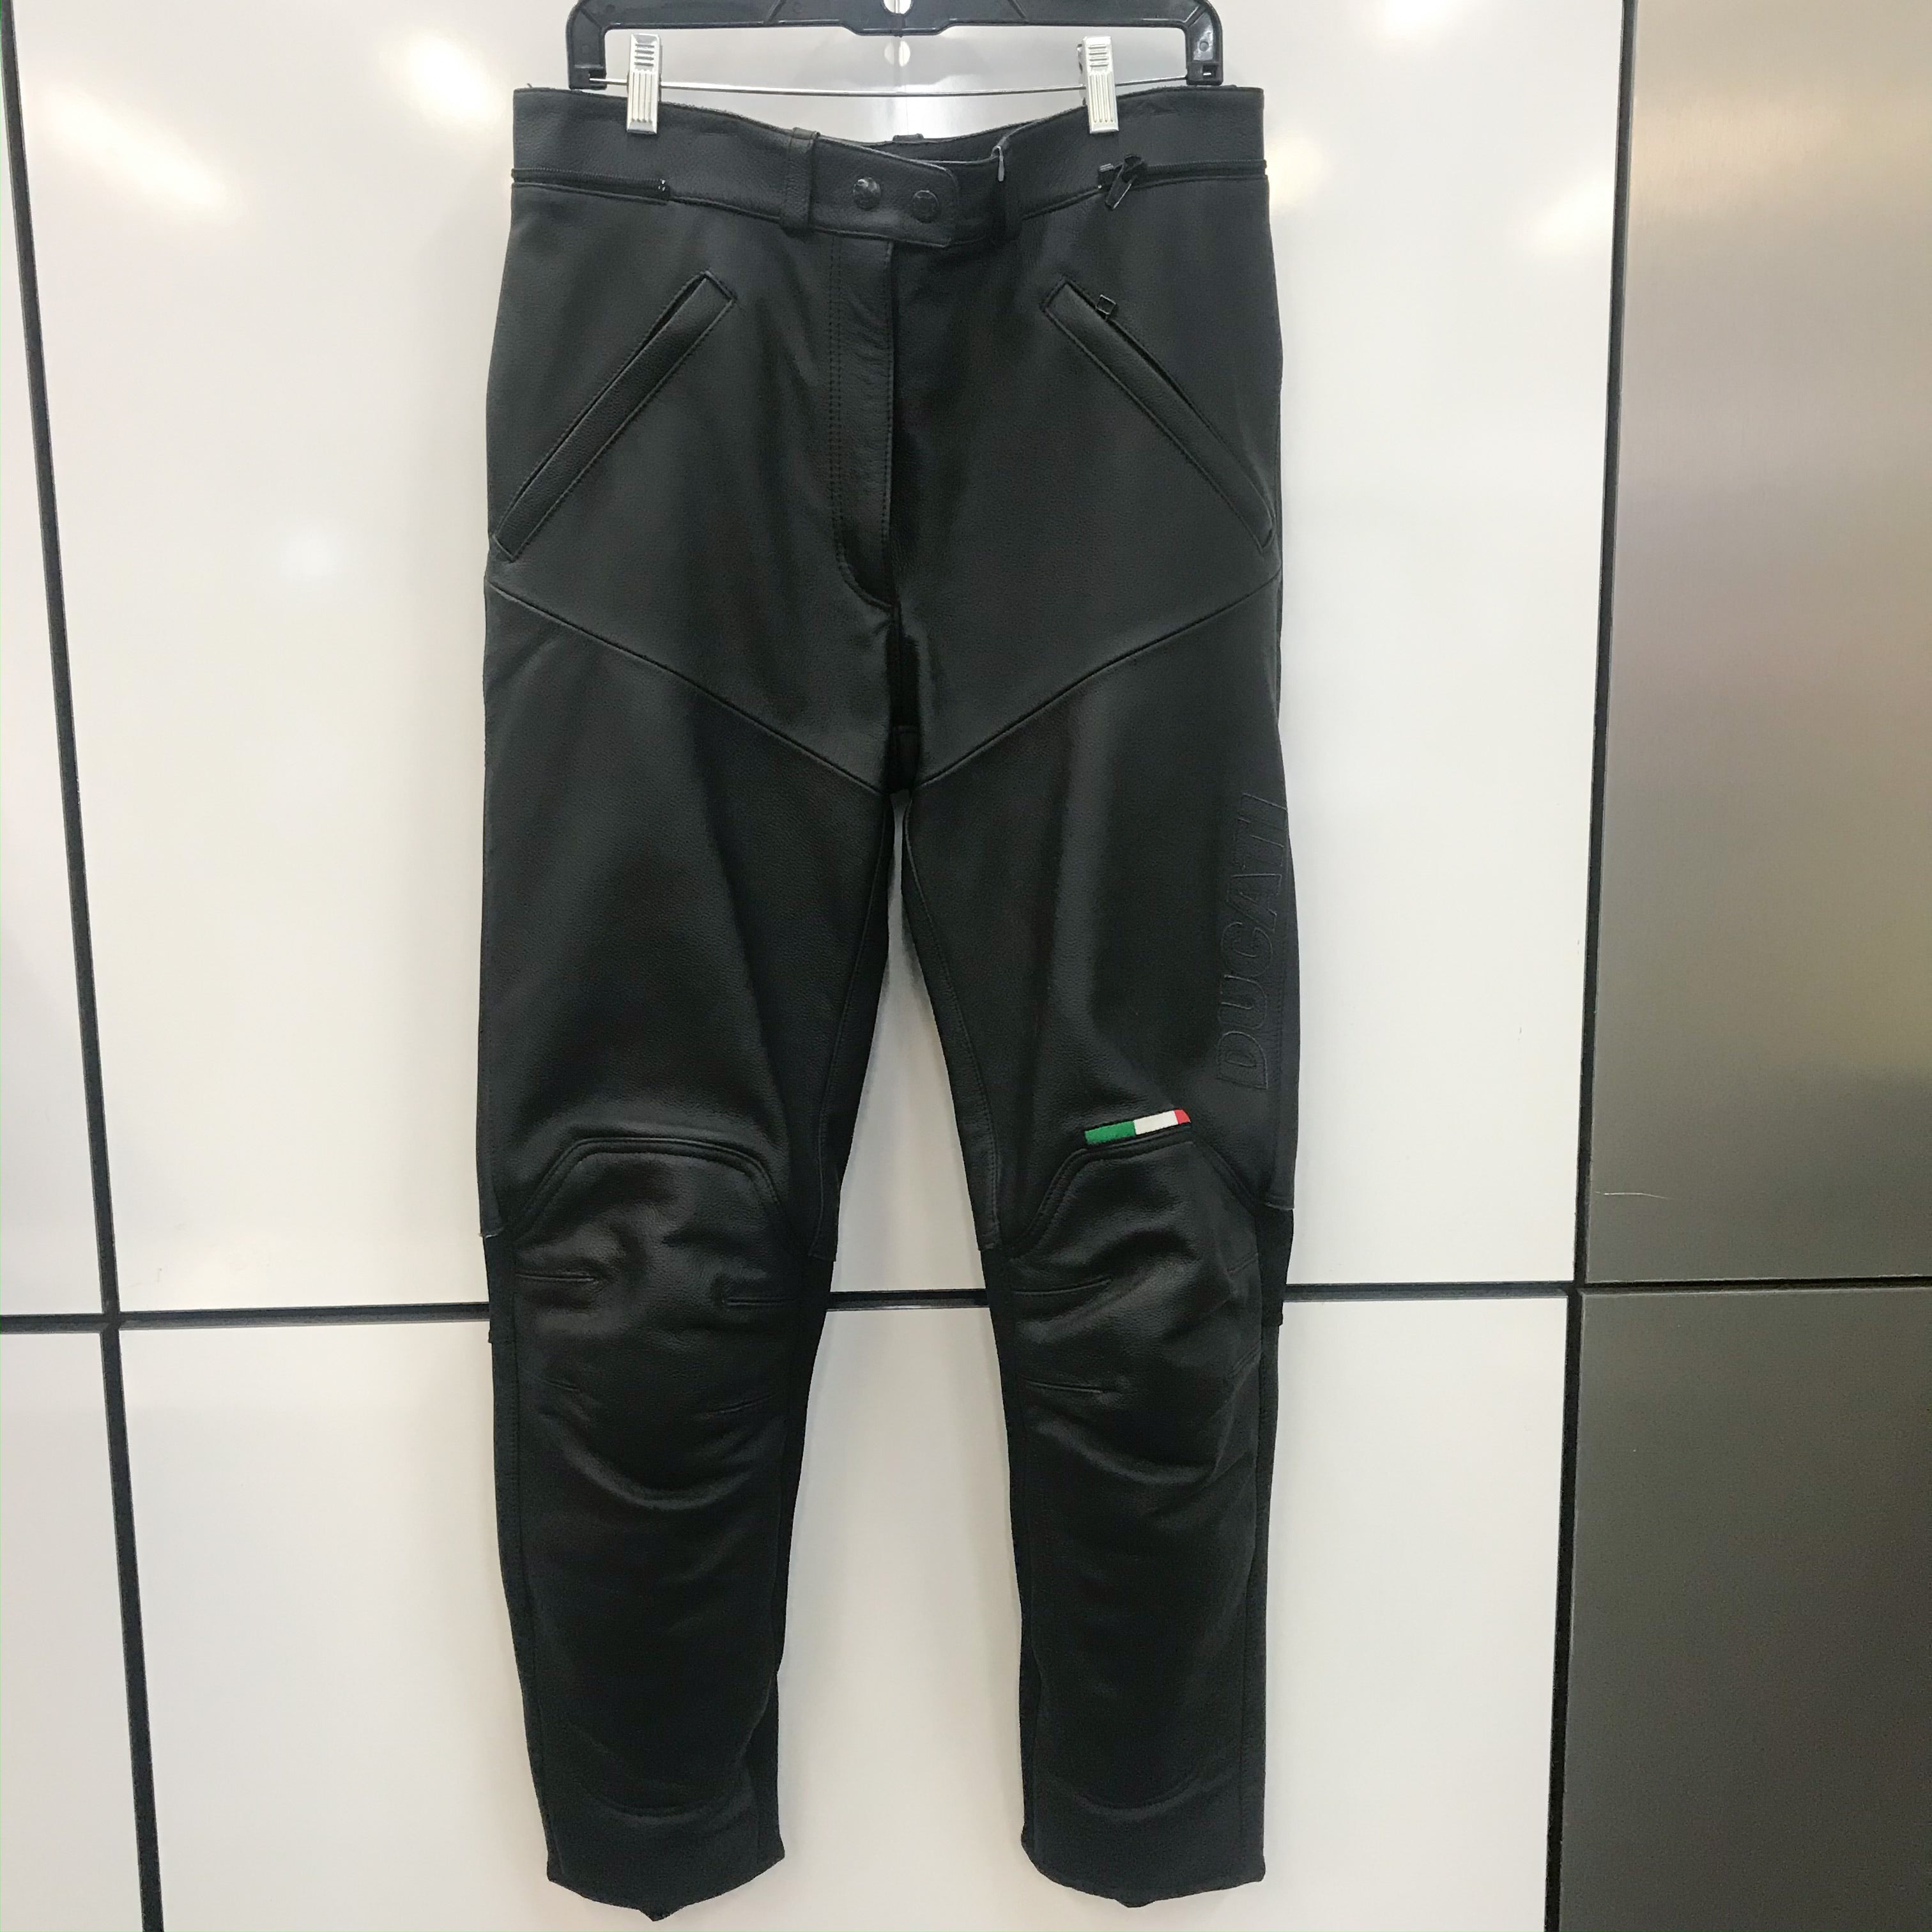 SOLD! - Dainese Pants (1 Perforated Leather, 1 Drake Air Textile, Both Sz  58) | PNW Riders - The Motorcycle Community for the Pacific Northwest